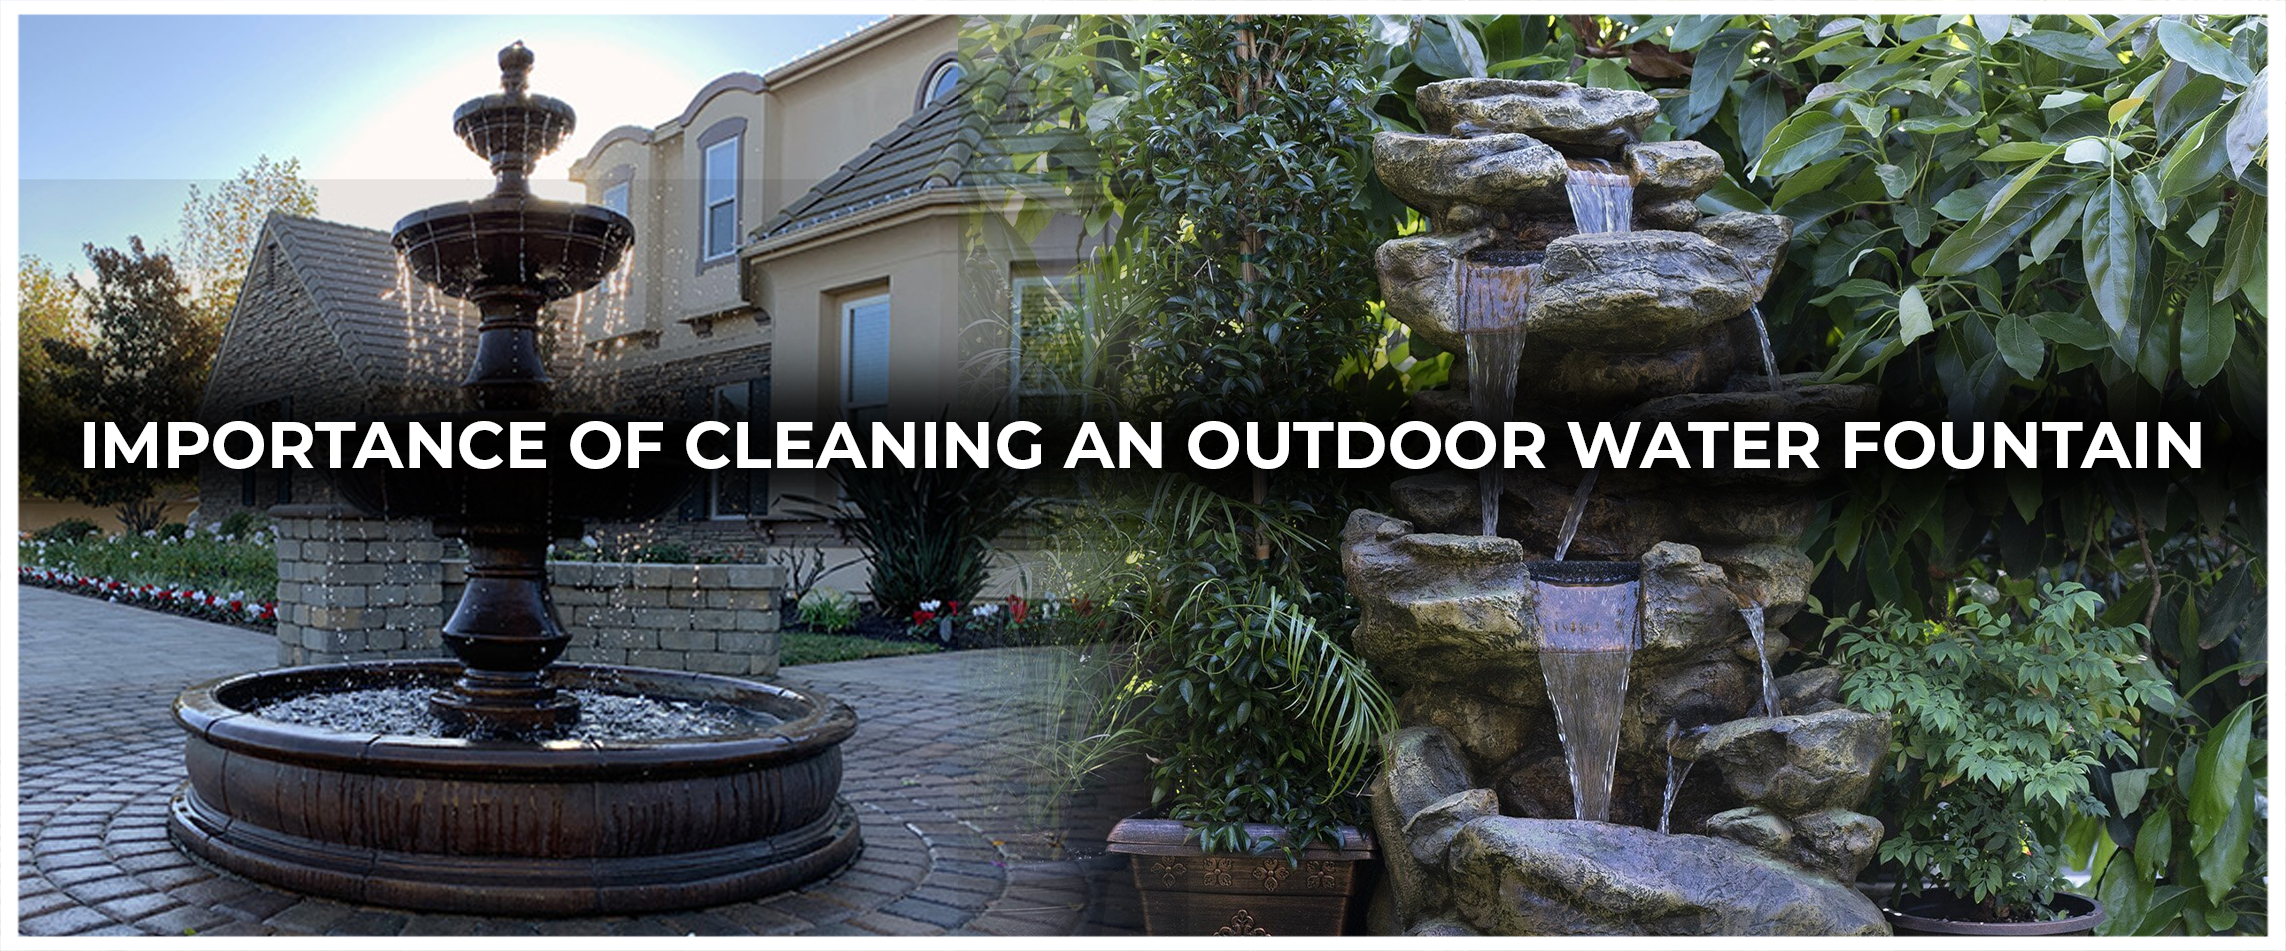 Importance of Cleaning an Outdoor Water Fountain